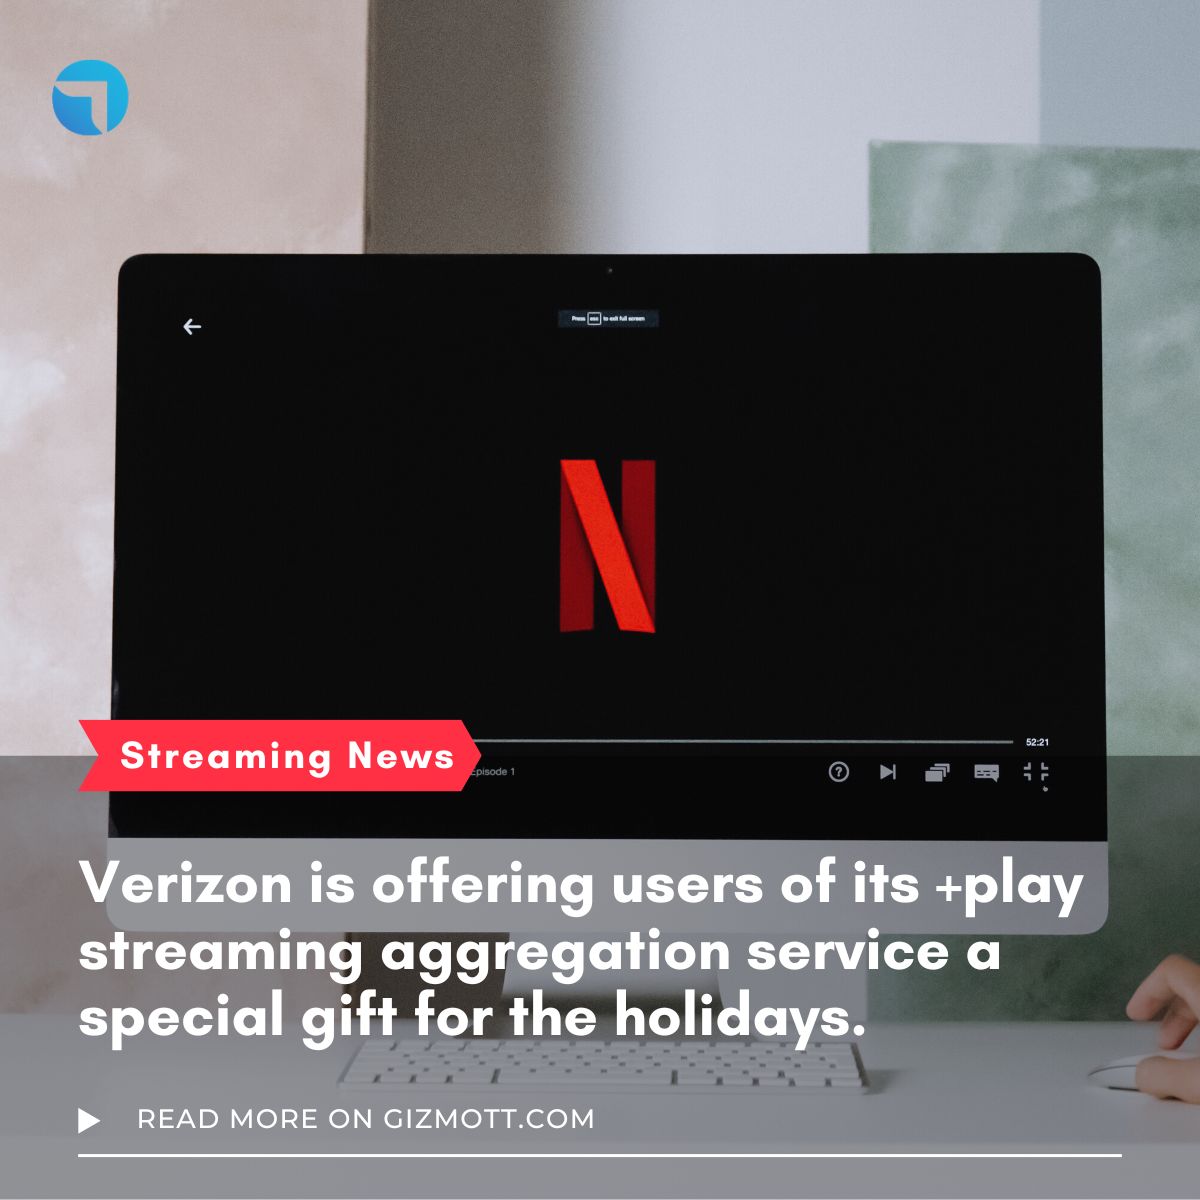 Verizon launches +play and other streaming news